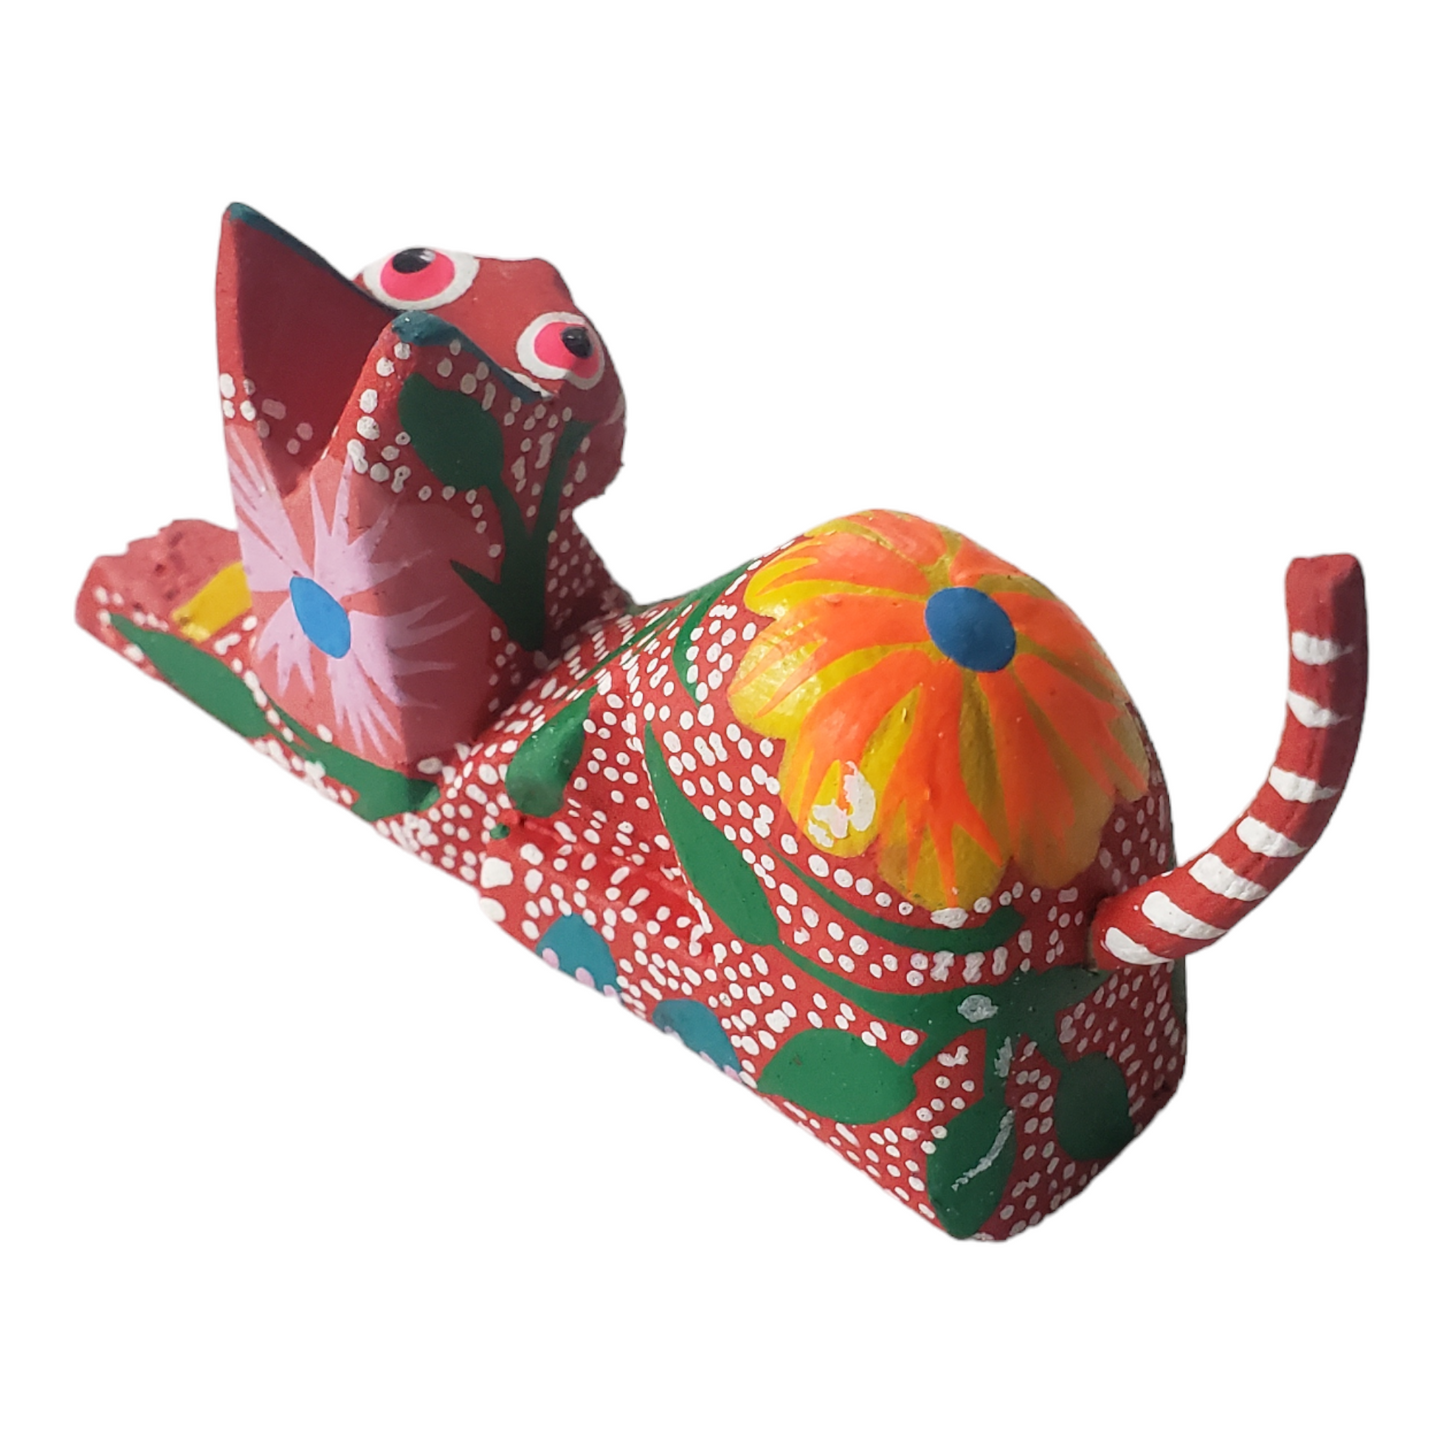 Oaxacan Alebrije Cat Mini Wood Carving Mexican Hand Painted